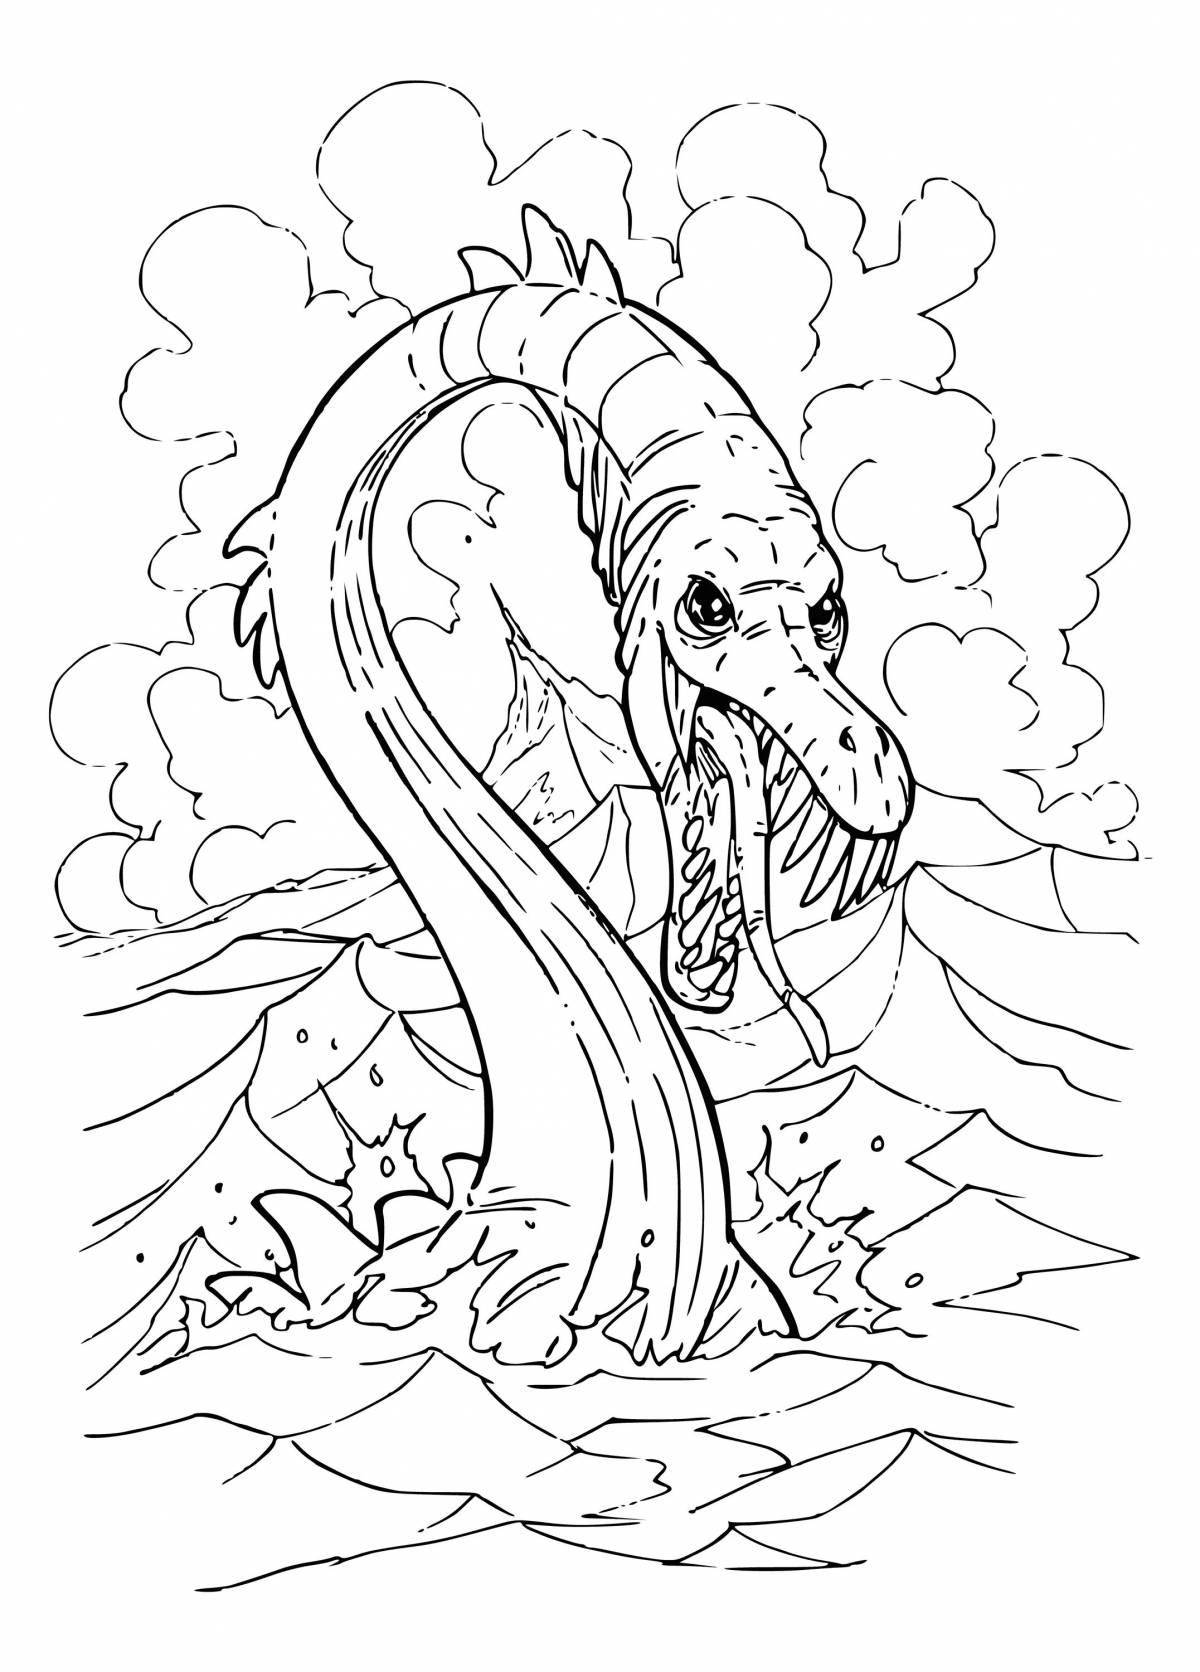 Mysterious sea monster coloring book